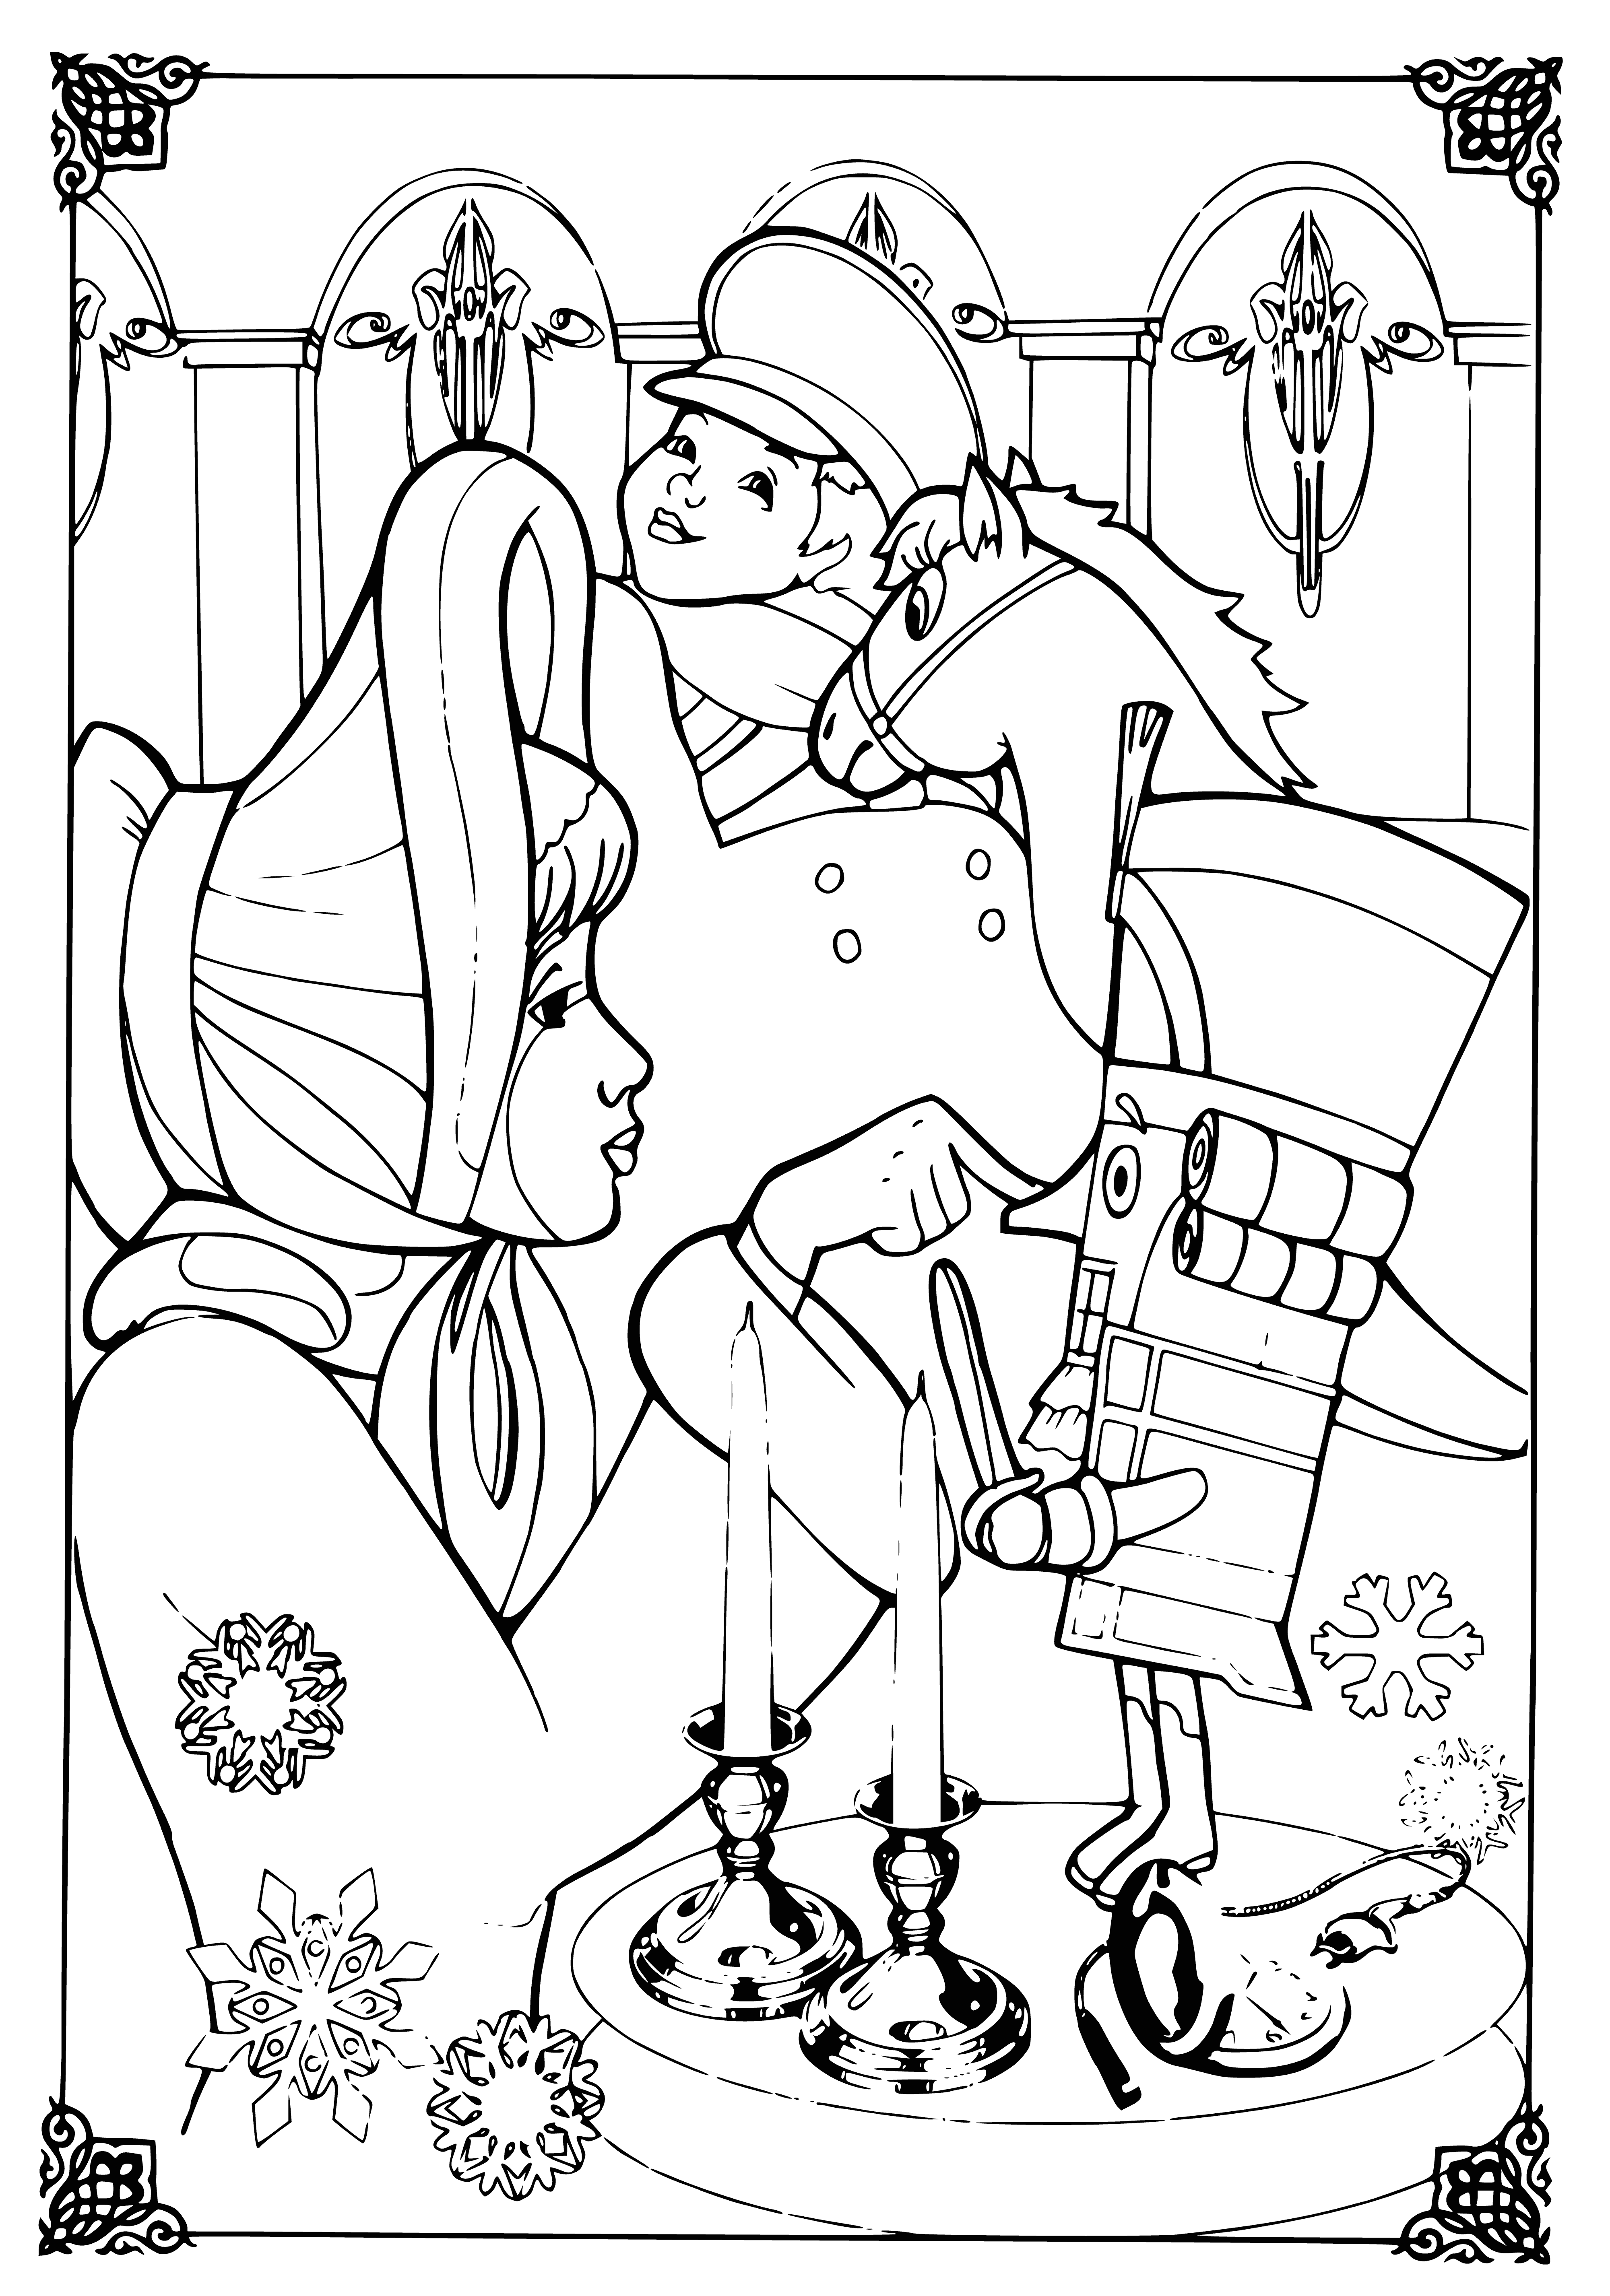 coloring page: Nutcracker in traditional garb holds a sword & small sack; 3 mice look up at him; faint stars in background.